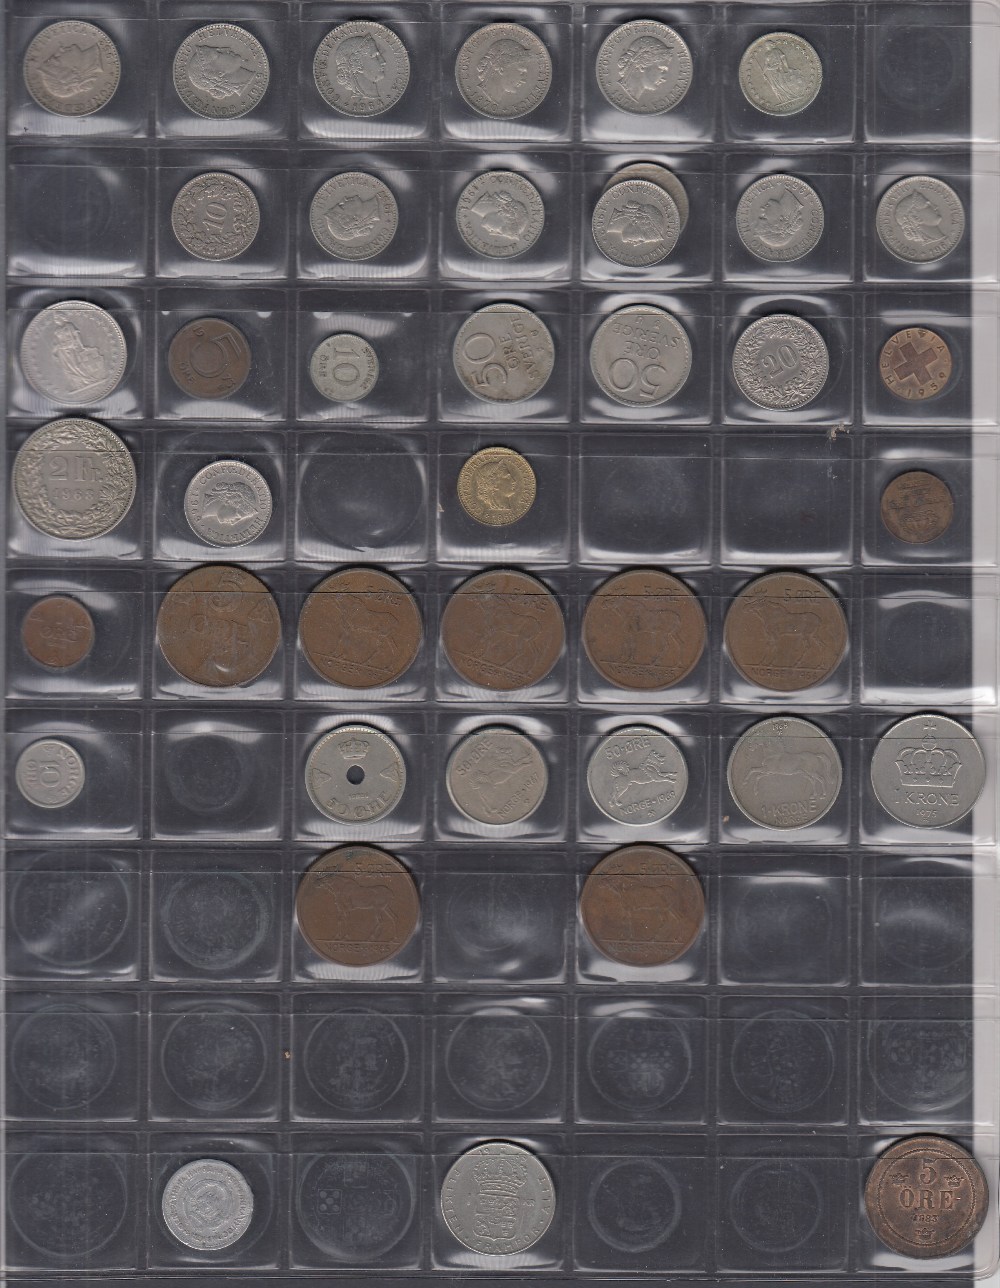 Album of mixed World coins including Netherlands, Germany, Malta etc - Image 3 of 3